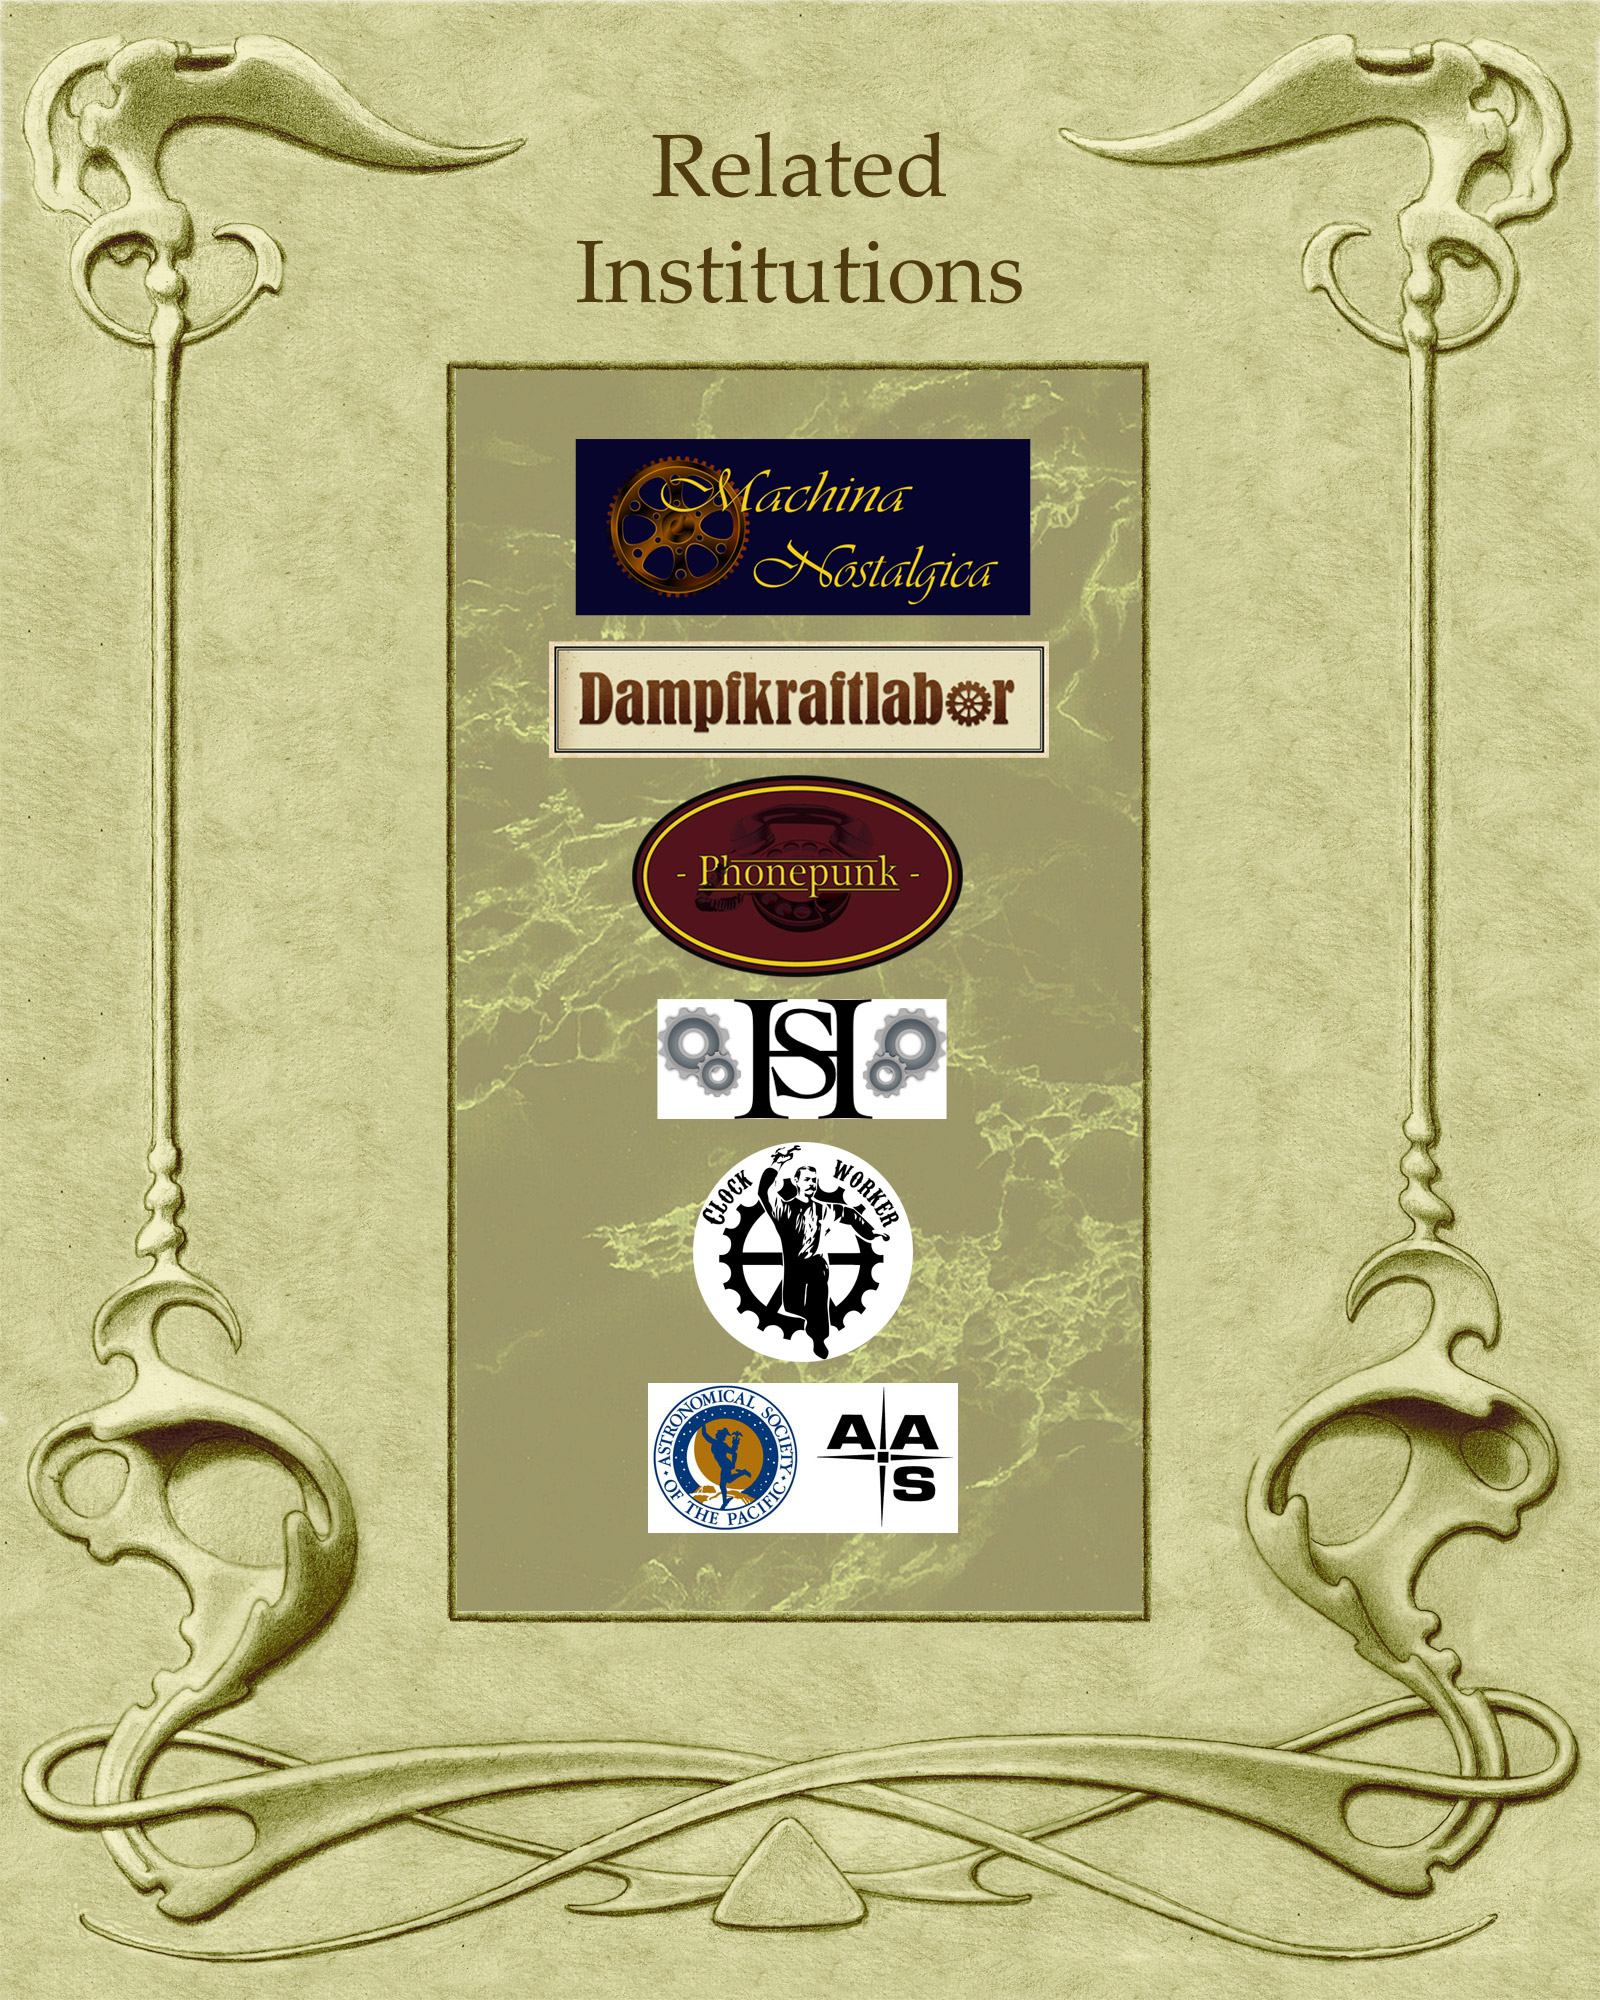 Related Institutions